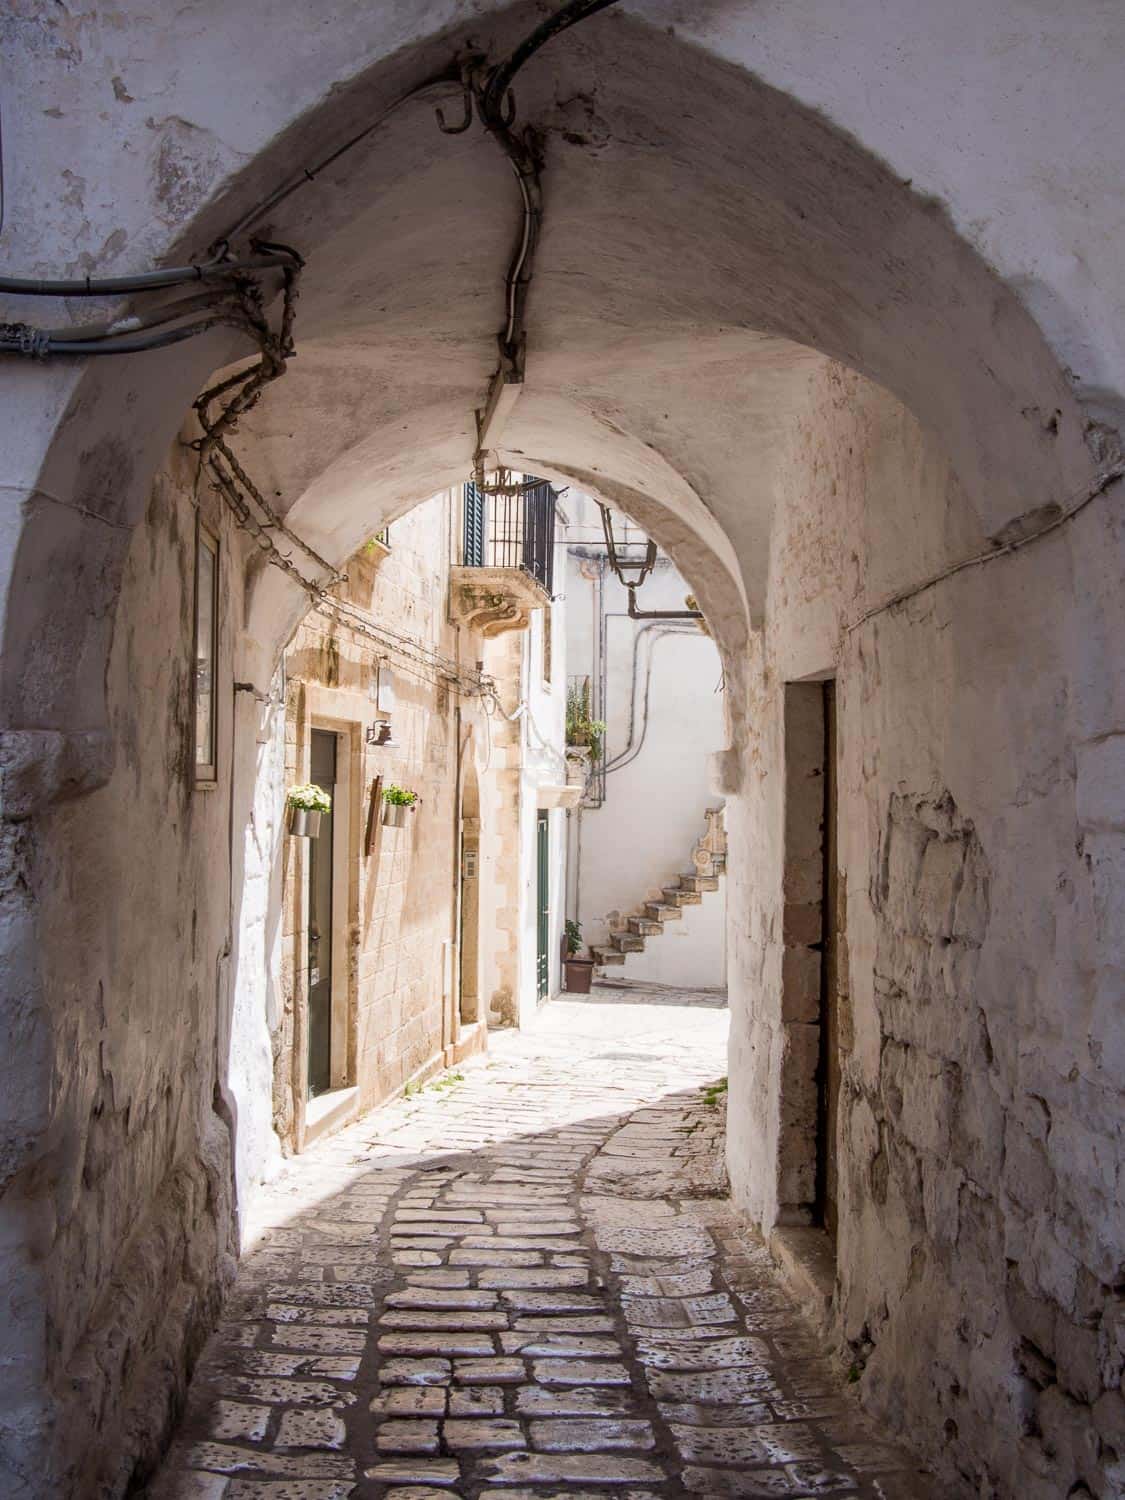 Narrow streets of Ceglie Messapica, a town in Puglia Italy